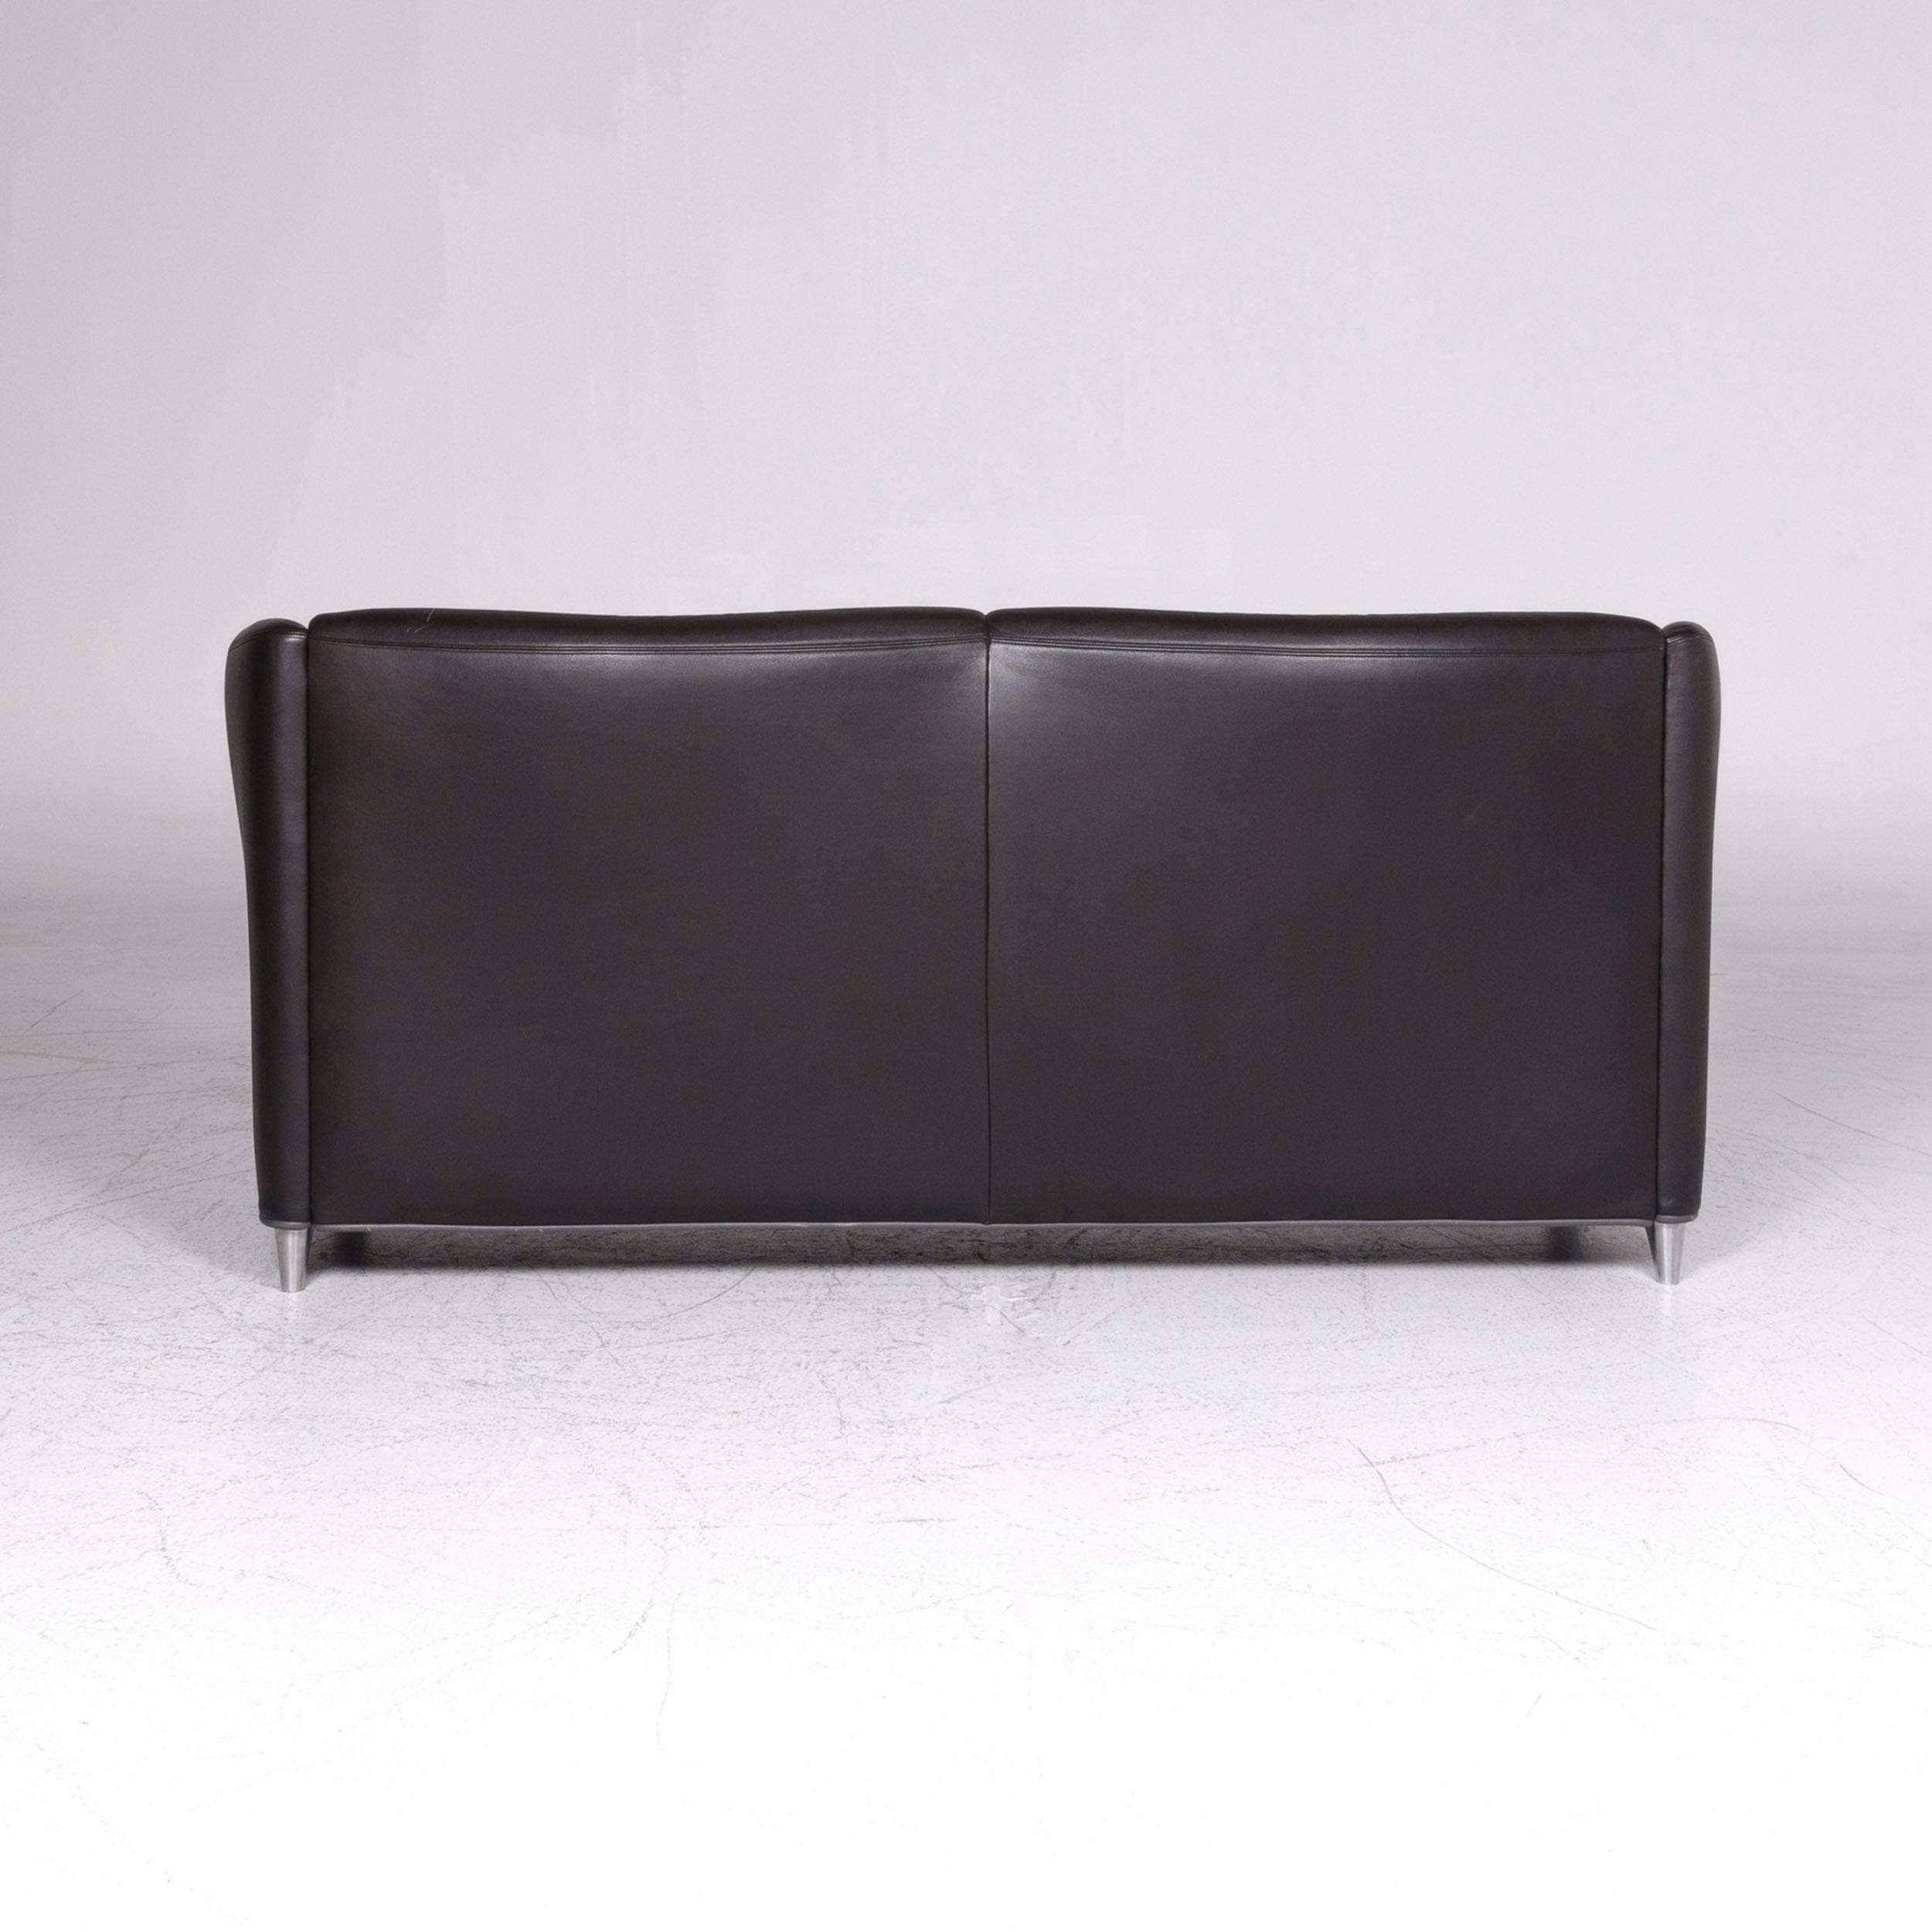 Contemporary De Sede Designer Leather Sofa Black Two-Seat Couch For Sale